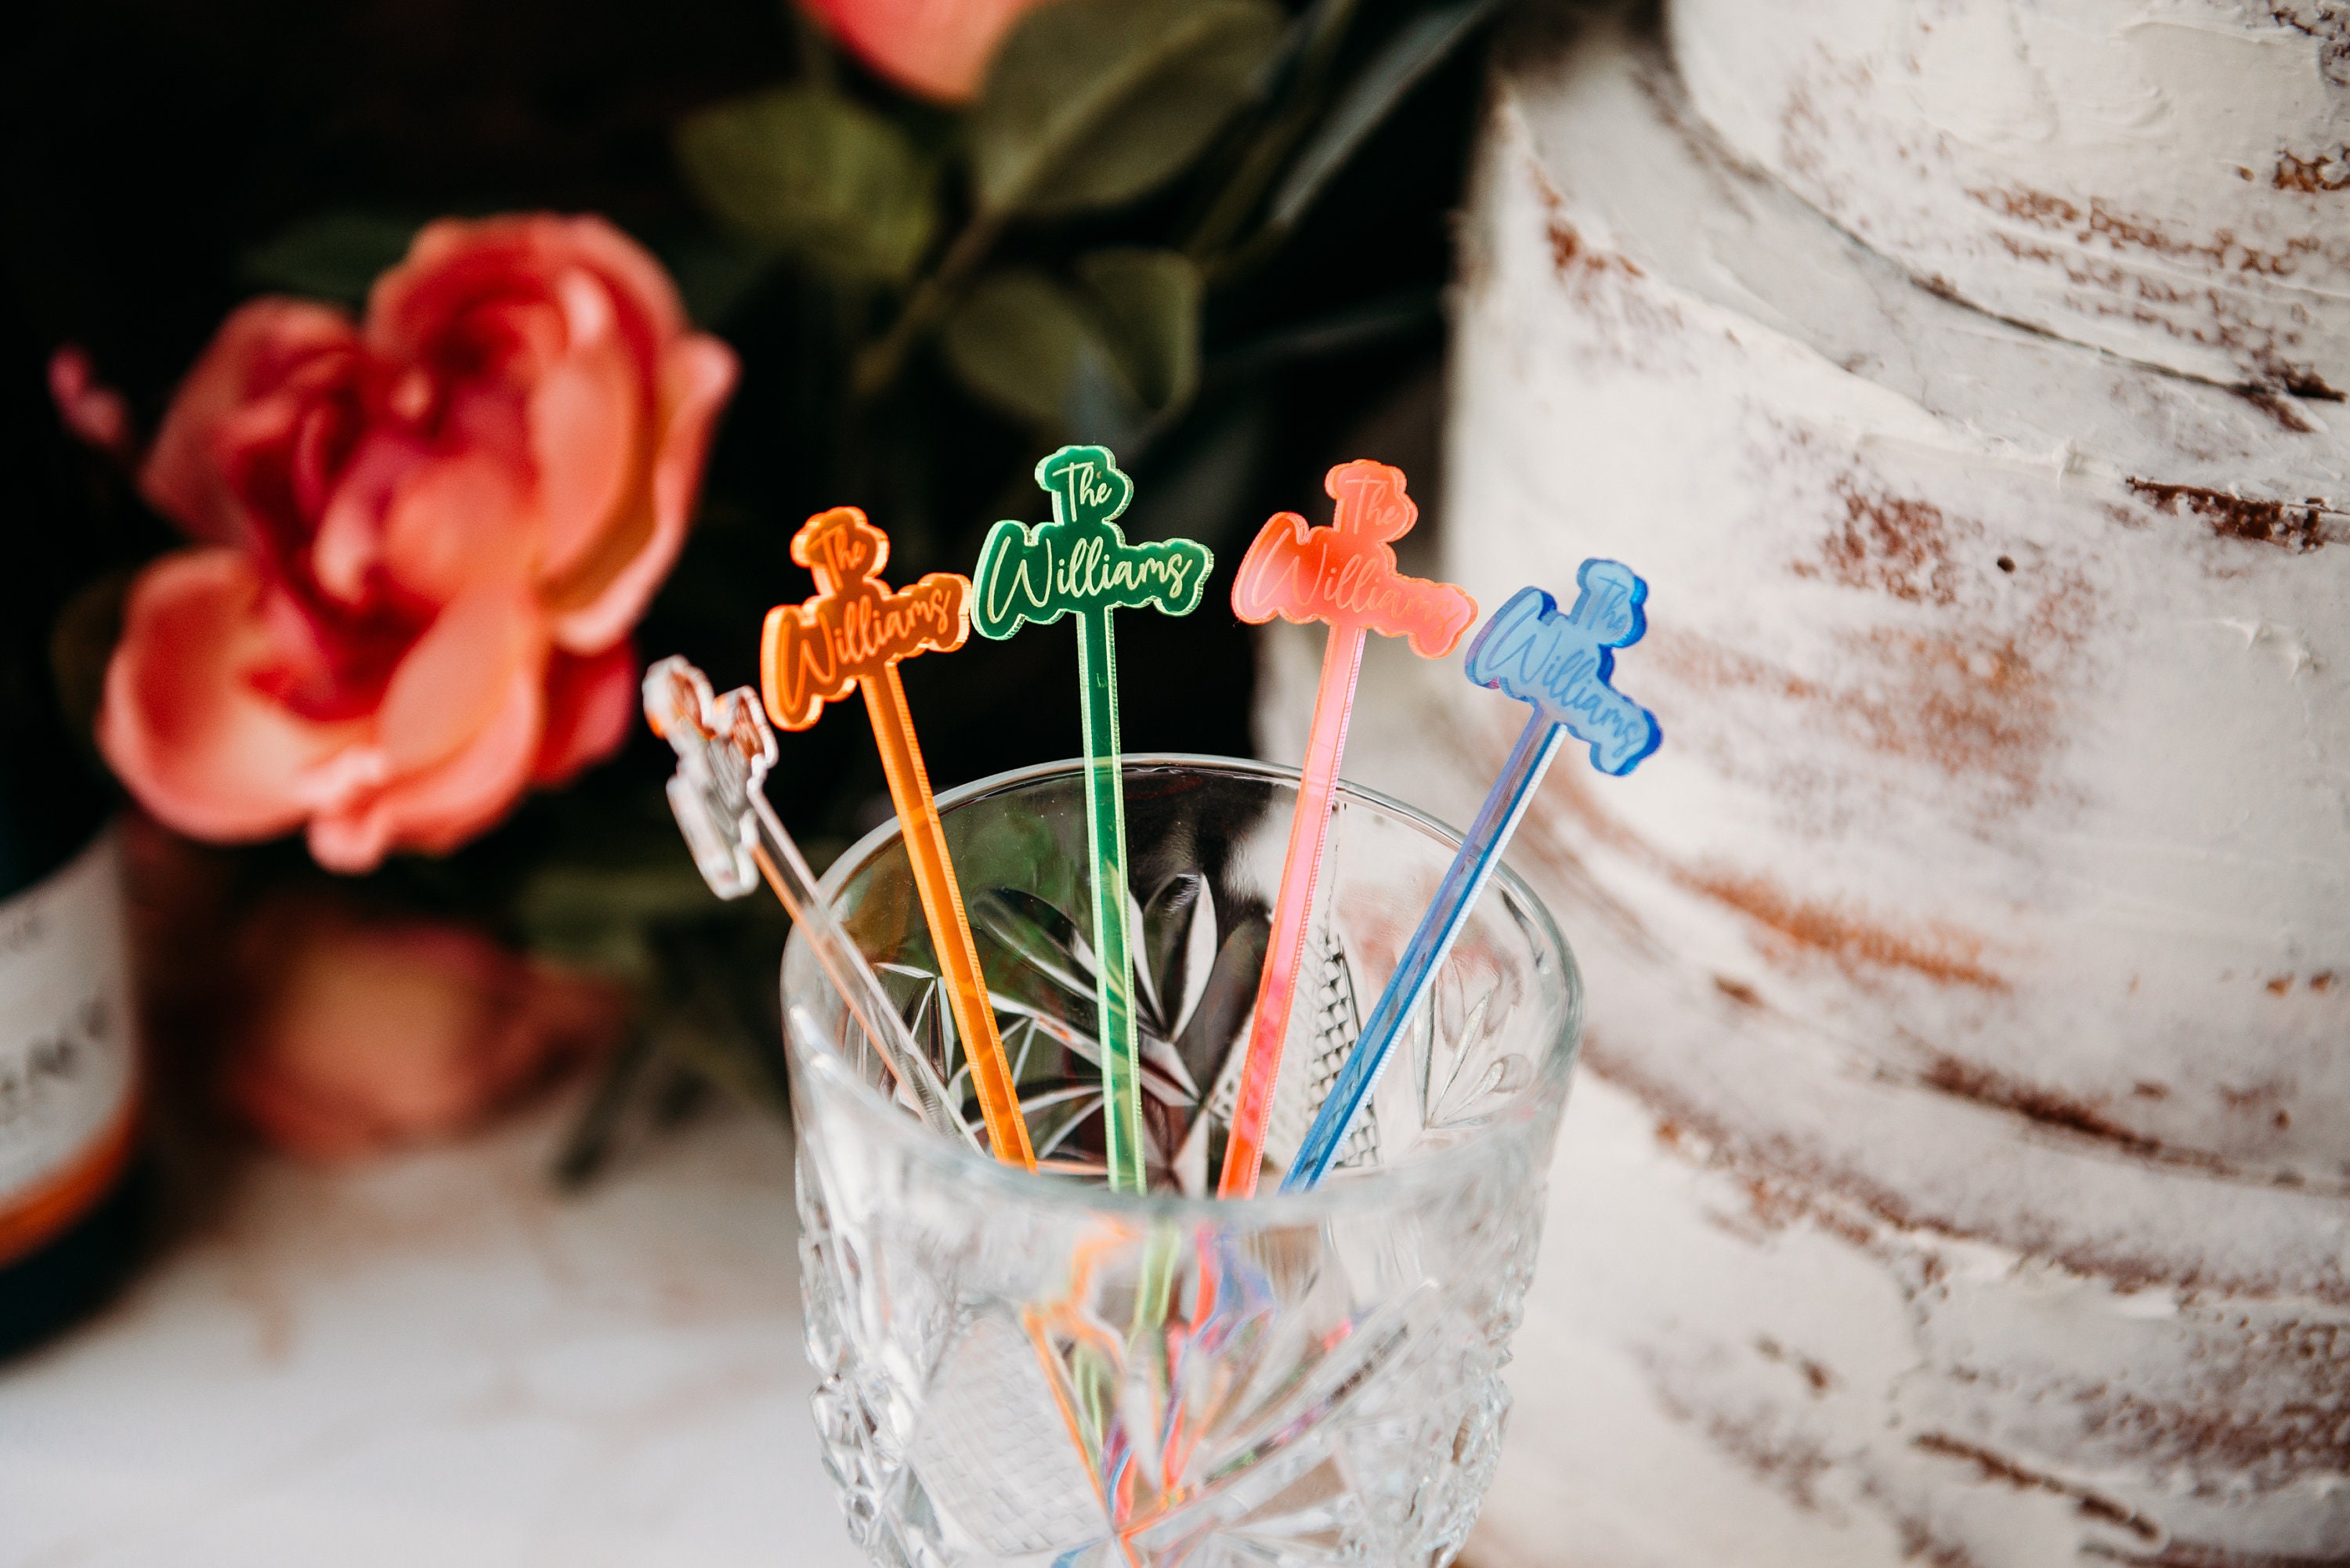 Custom Personalized Stirrer, Stirrer Birthday, Wedding Drink Charms, Drink Names, Cocktail Tags, Couple Names, Party Neon Acrylic Stirrer